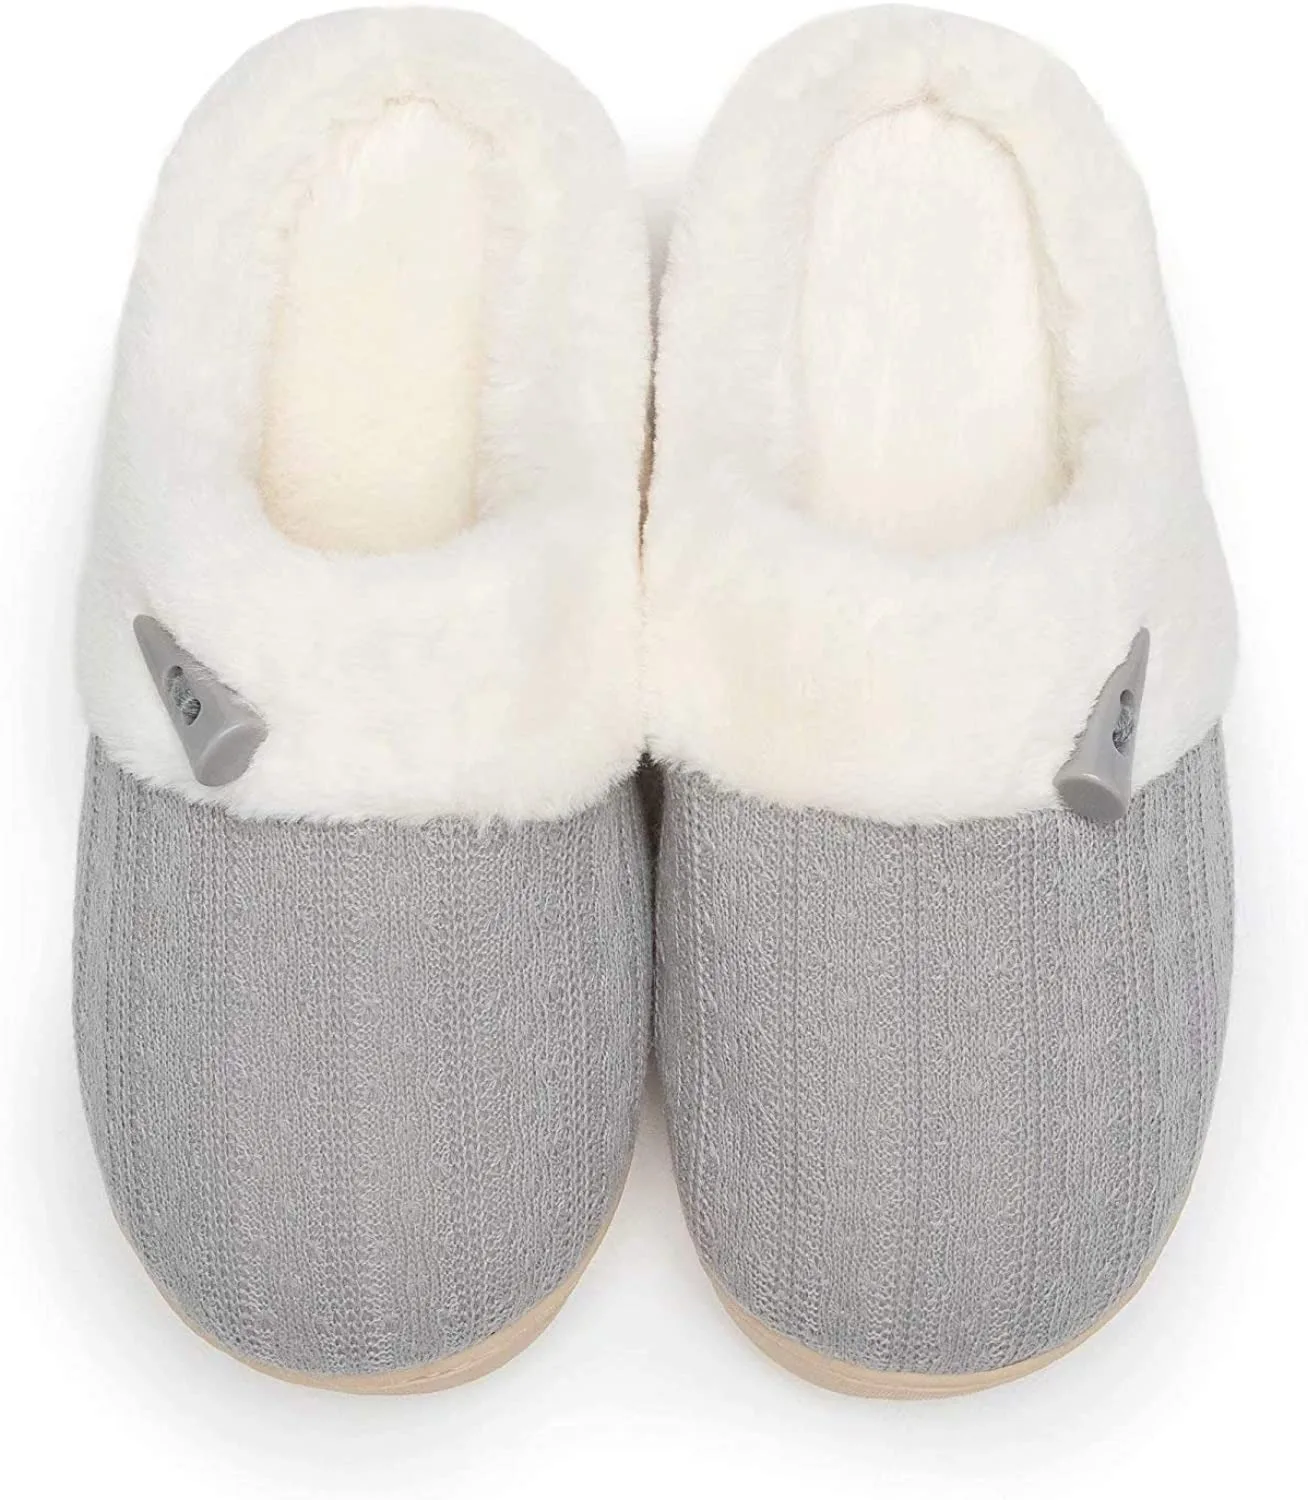 

Women's Slip on Fuzzy House Slippers Memory Foam Slippers Scuff Outdoor Indoor Warm Plush Bedroom Shoes with Faux Fur Lining, As picture and also can make as your request